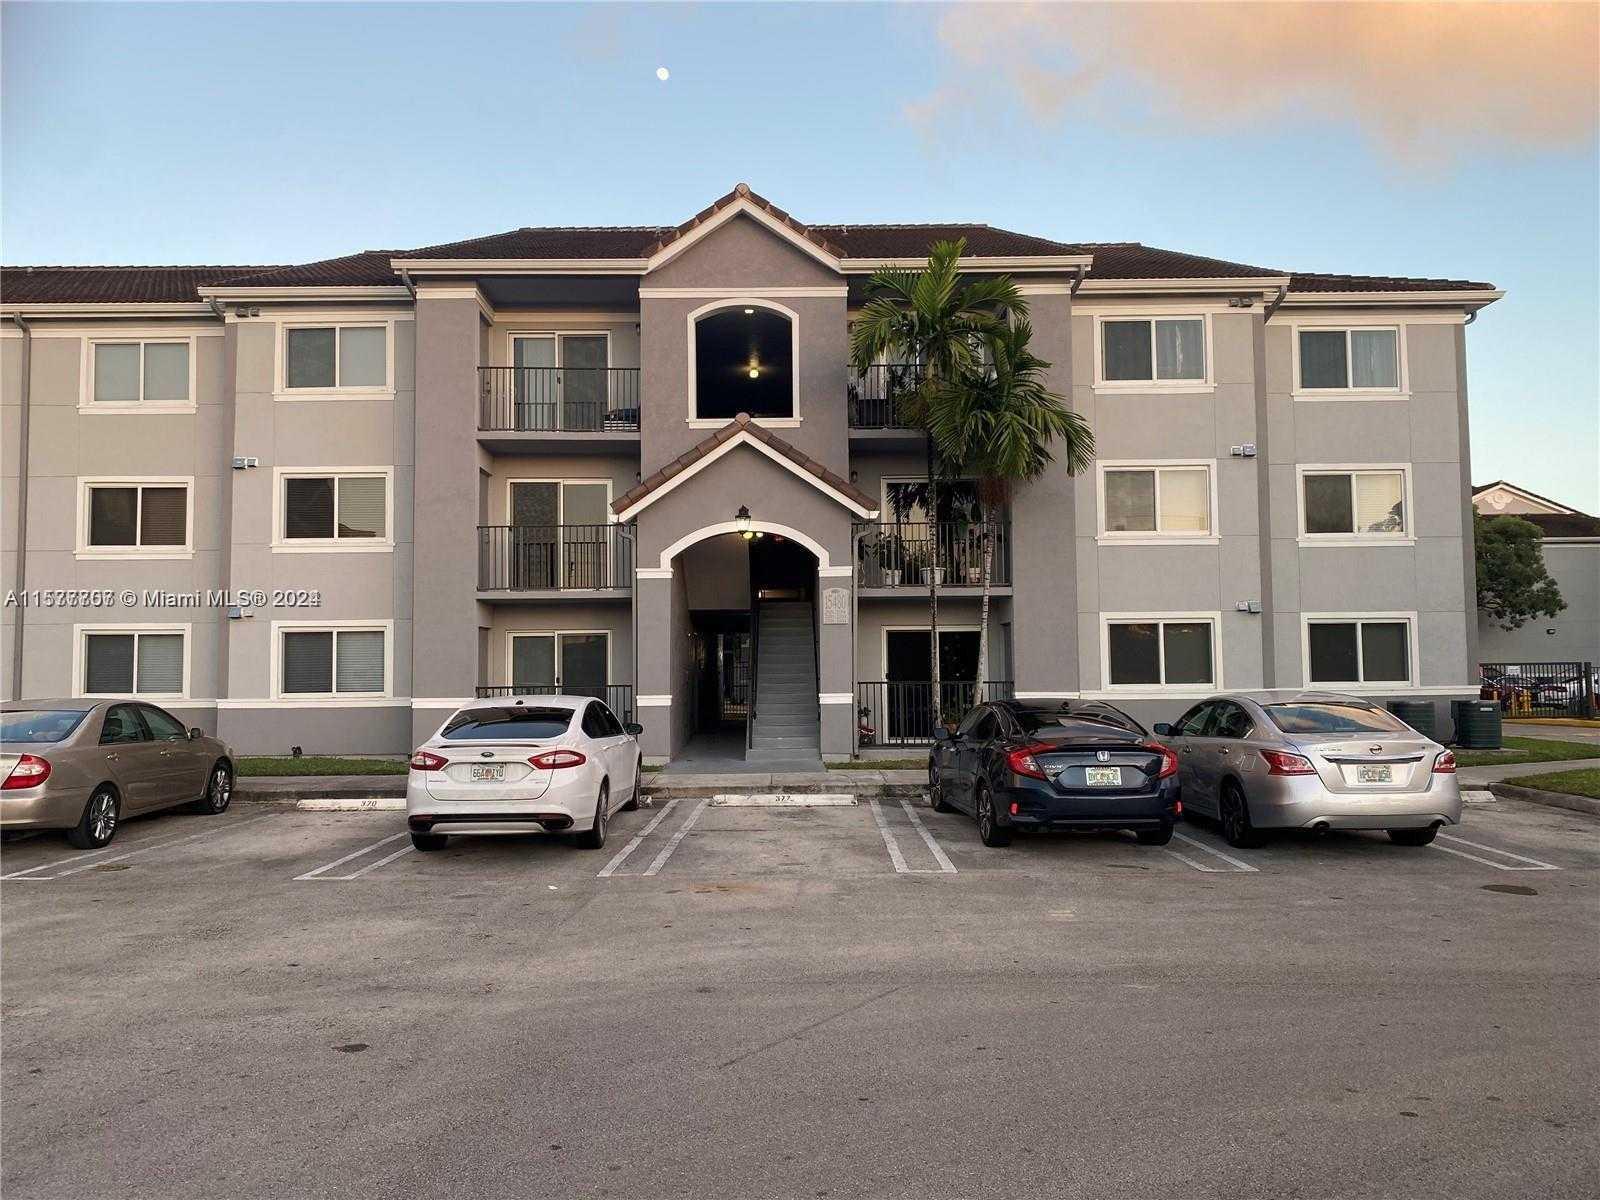 15480 284 ST 2203, Homestead, Condo,  for rent, Dale Largie, CPA, SFR, LIFESTYLE INTERNATIONAL REALTY